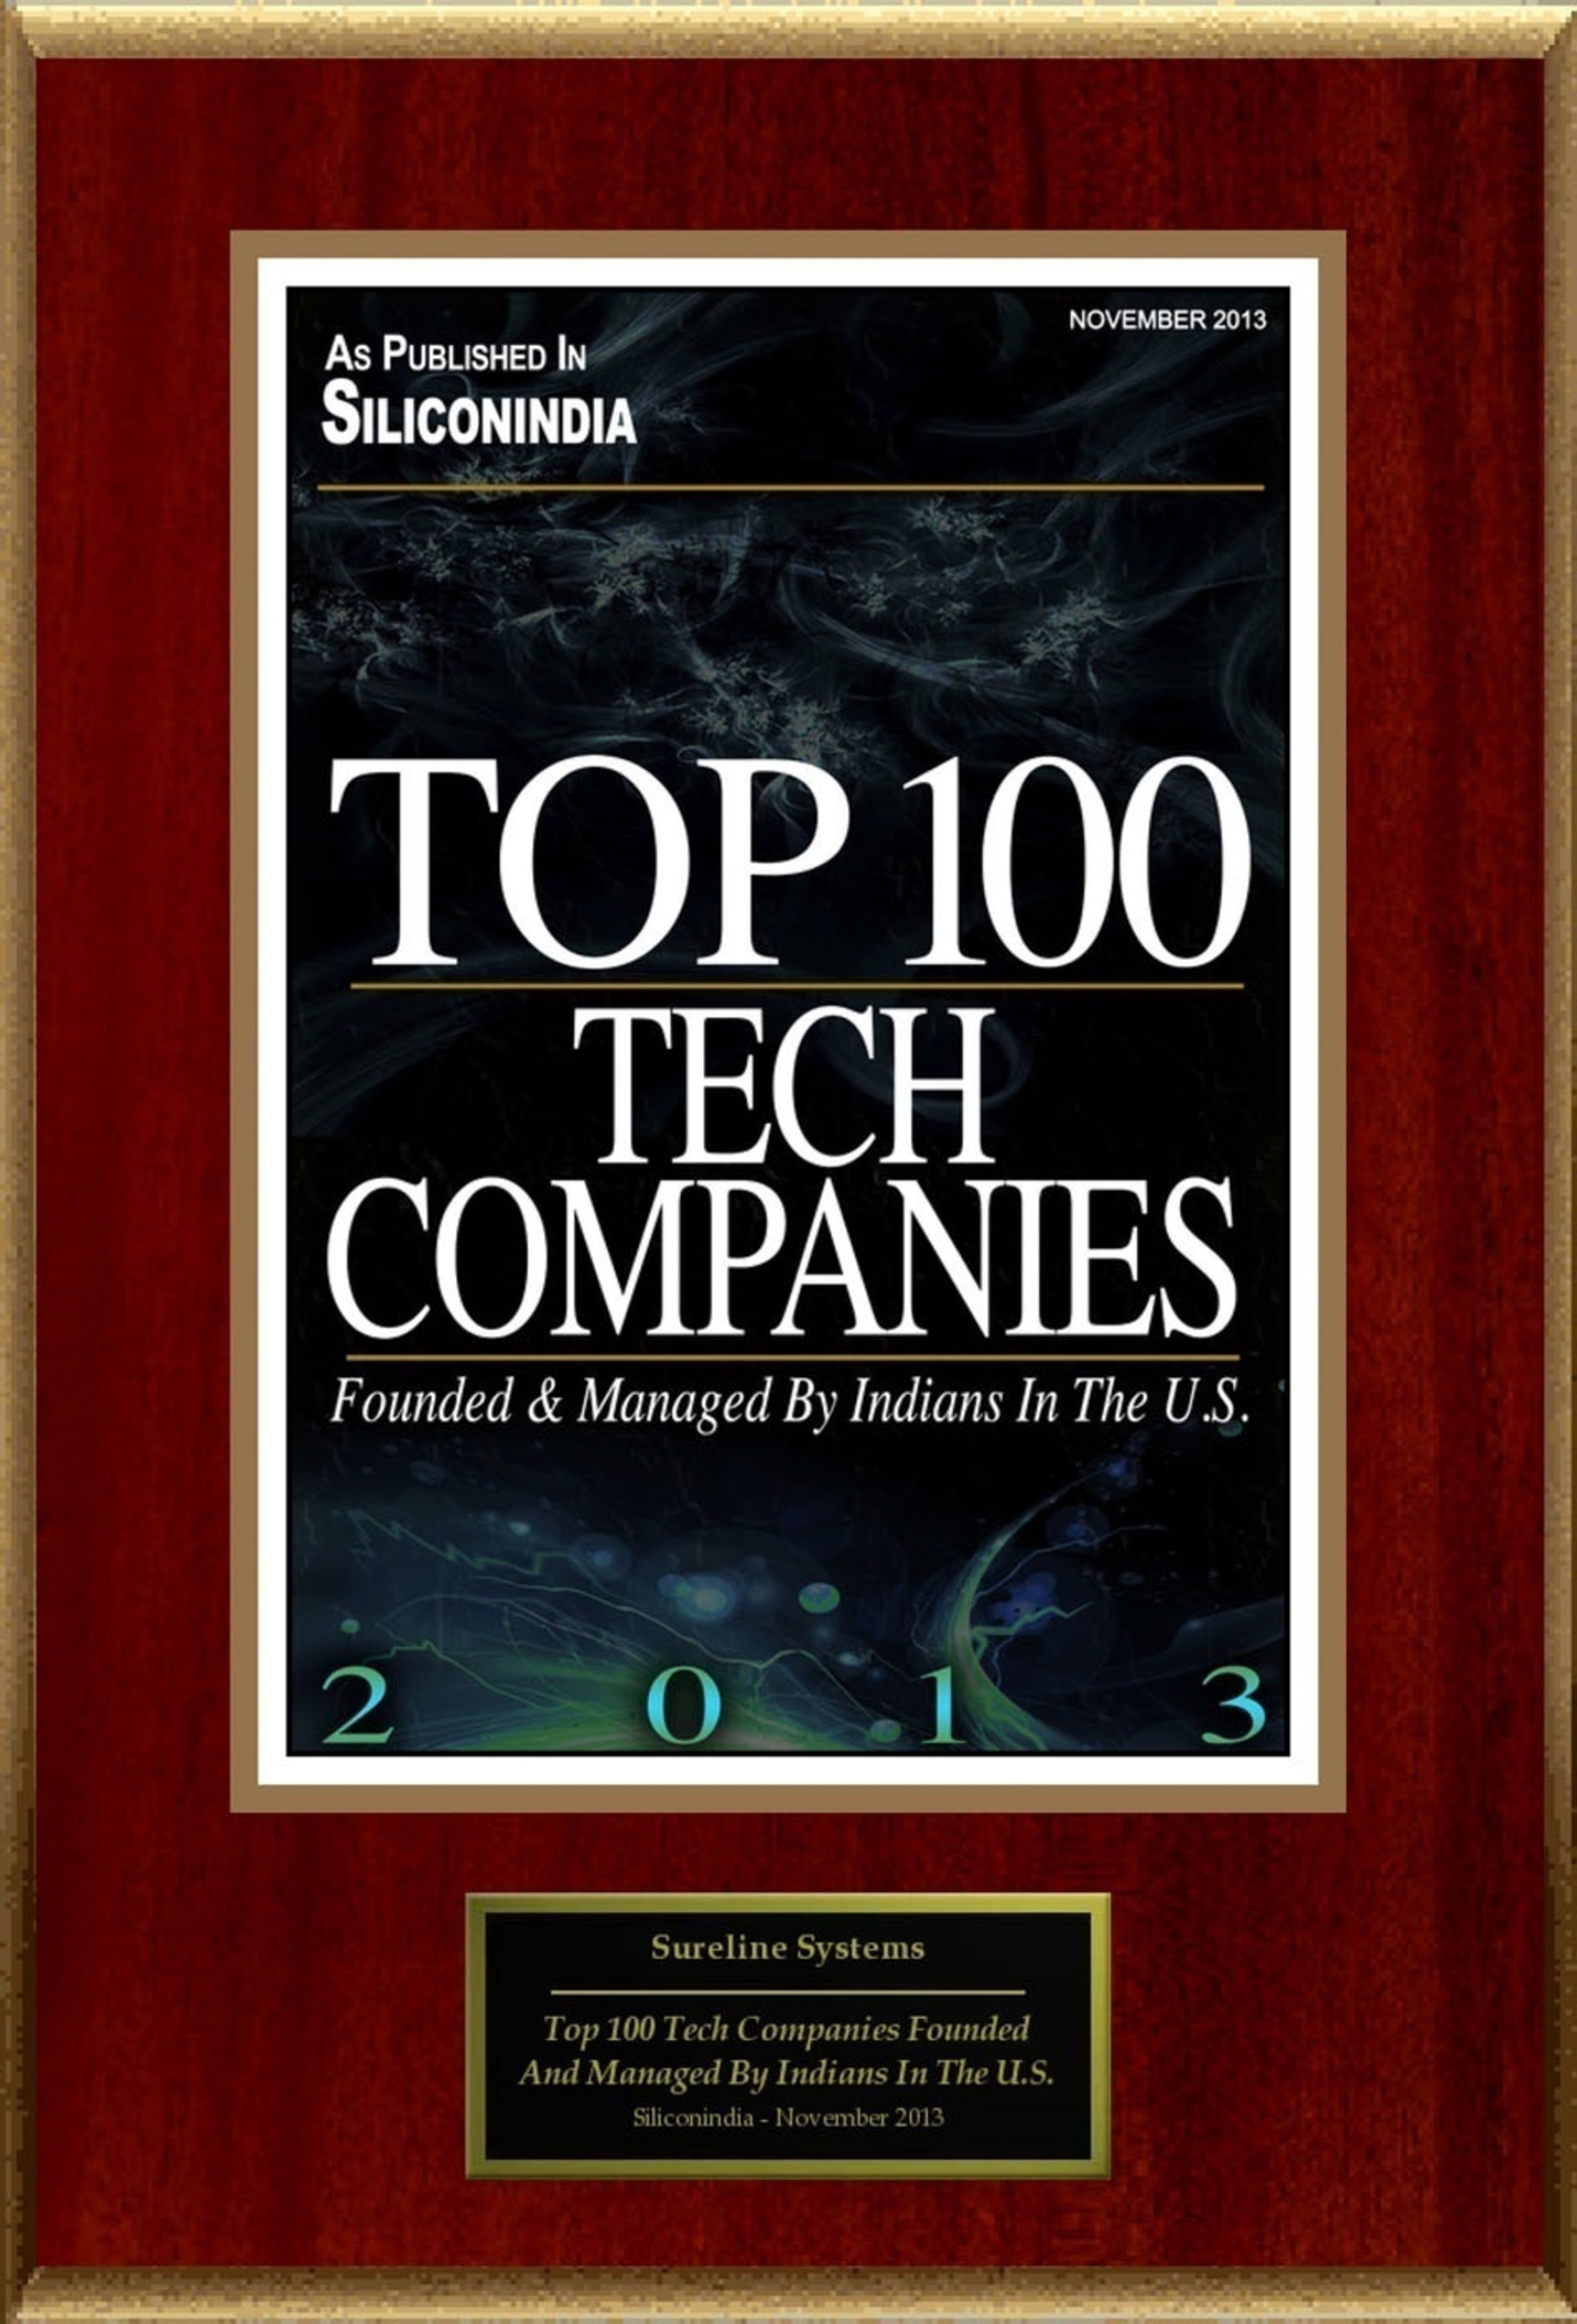 Sureline Systems Selected For ''Top 100 Tech Companies Founded And Managed By Indians In The U.S.'' (PRNewsFoto/Sureline Systems)